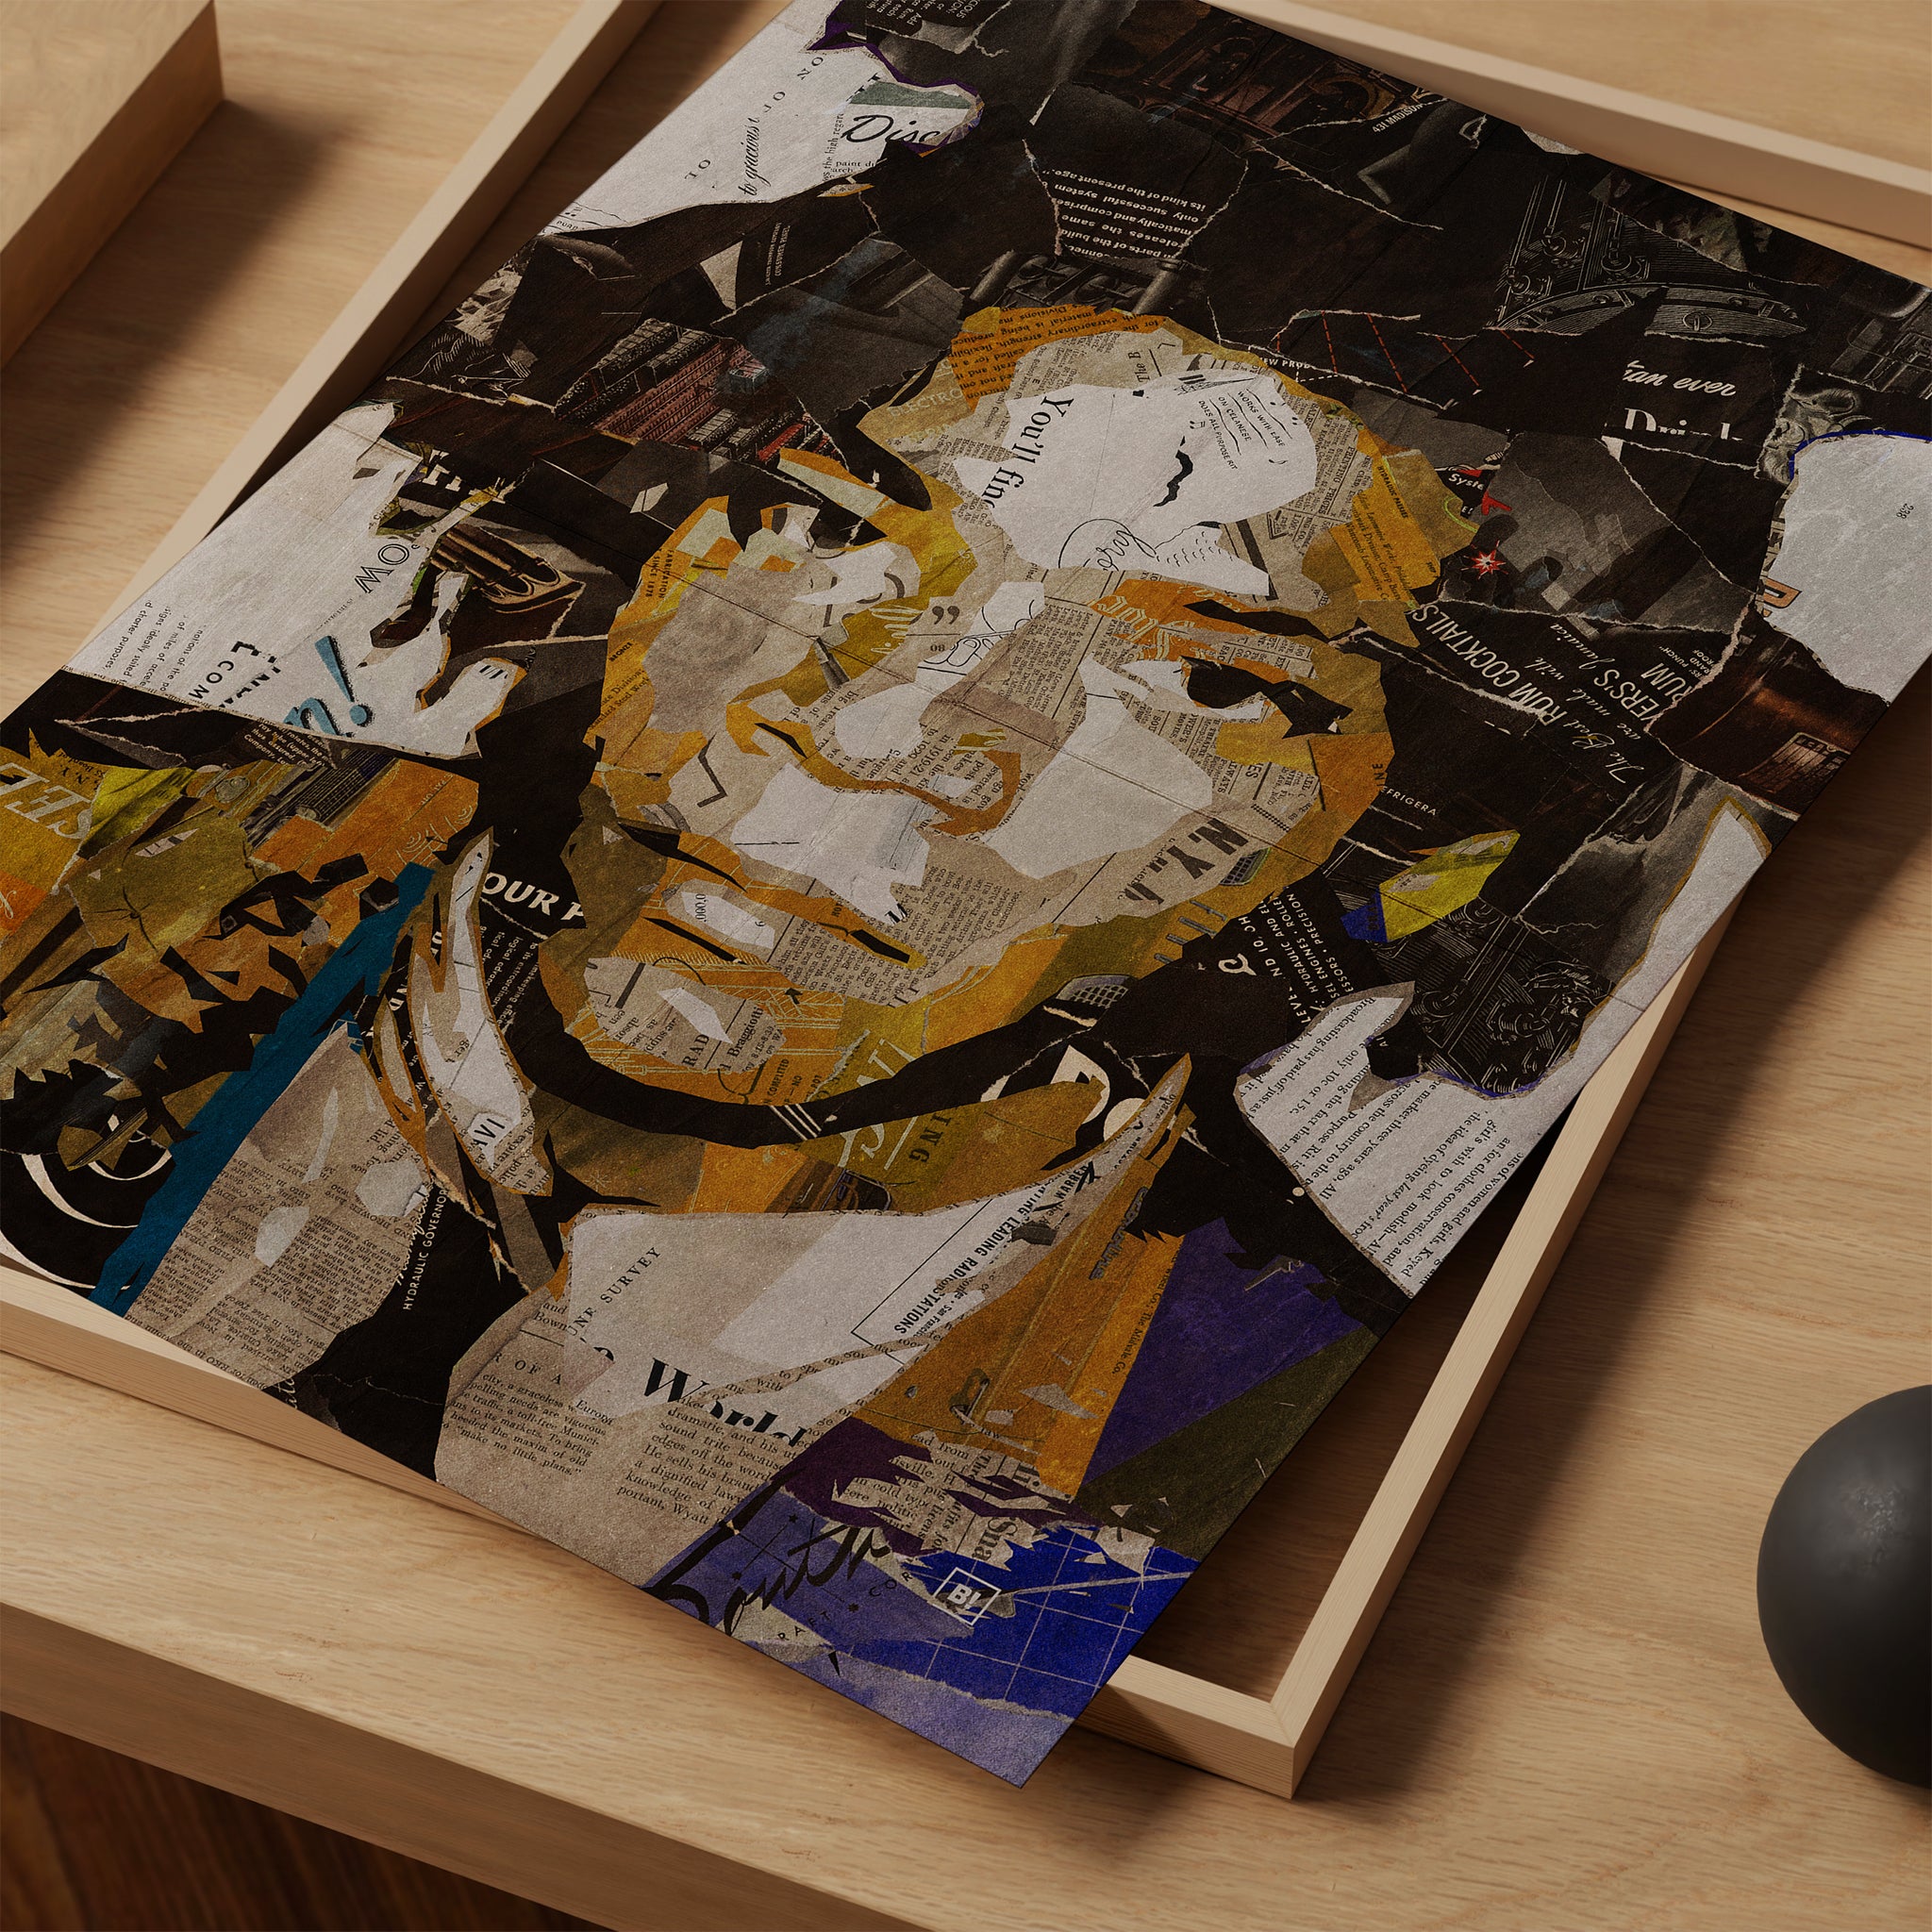 Be inspired by our iconic collage portrait art print of Jean-Michel Basquiat. This artwork was printed using the giclée process on archival acid-free paper and is presented as a print close-up, capturing its timeless beauty in every detail.